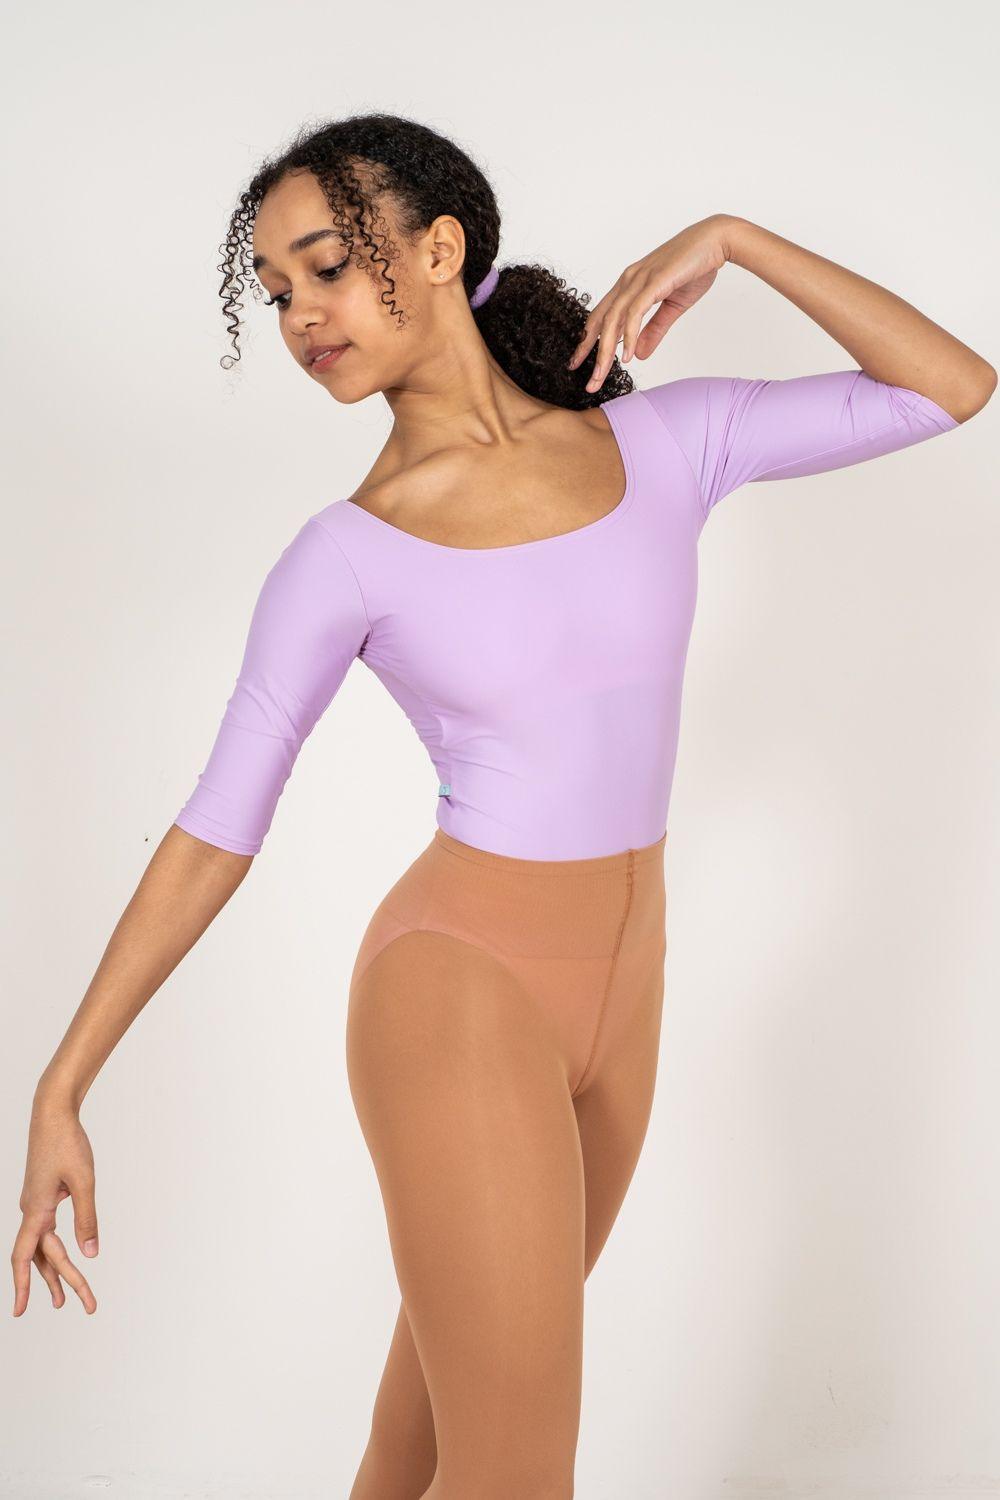 Women's Barcelona Half Sleeve Leotard - Lavender - Long Sleeve, Ready to Ship - Imperfect Pointes